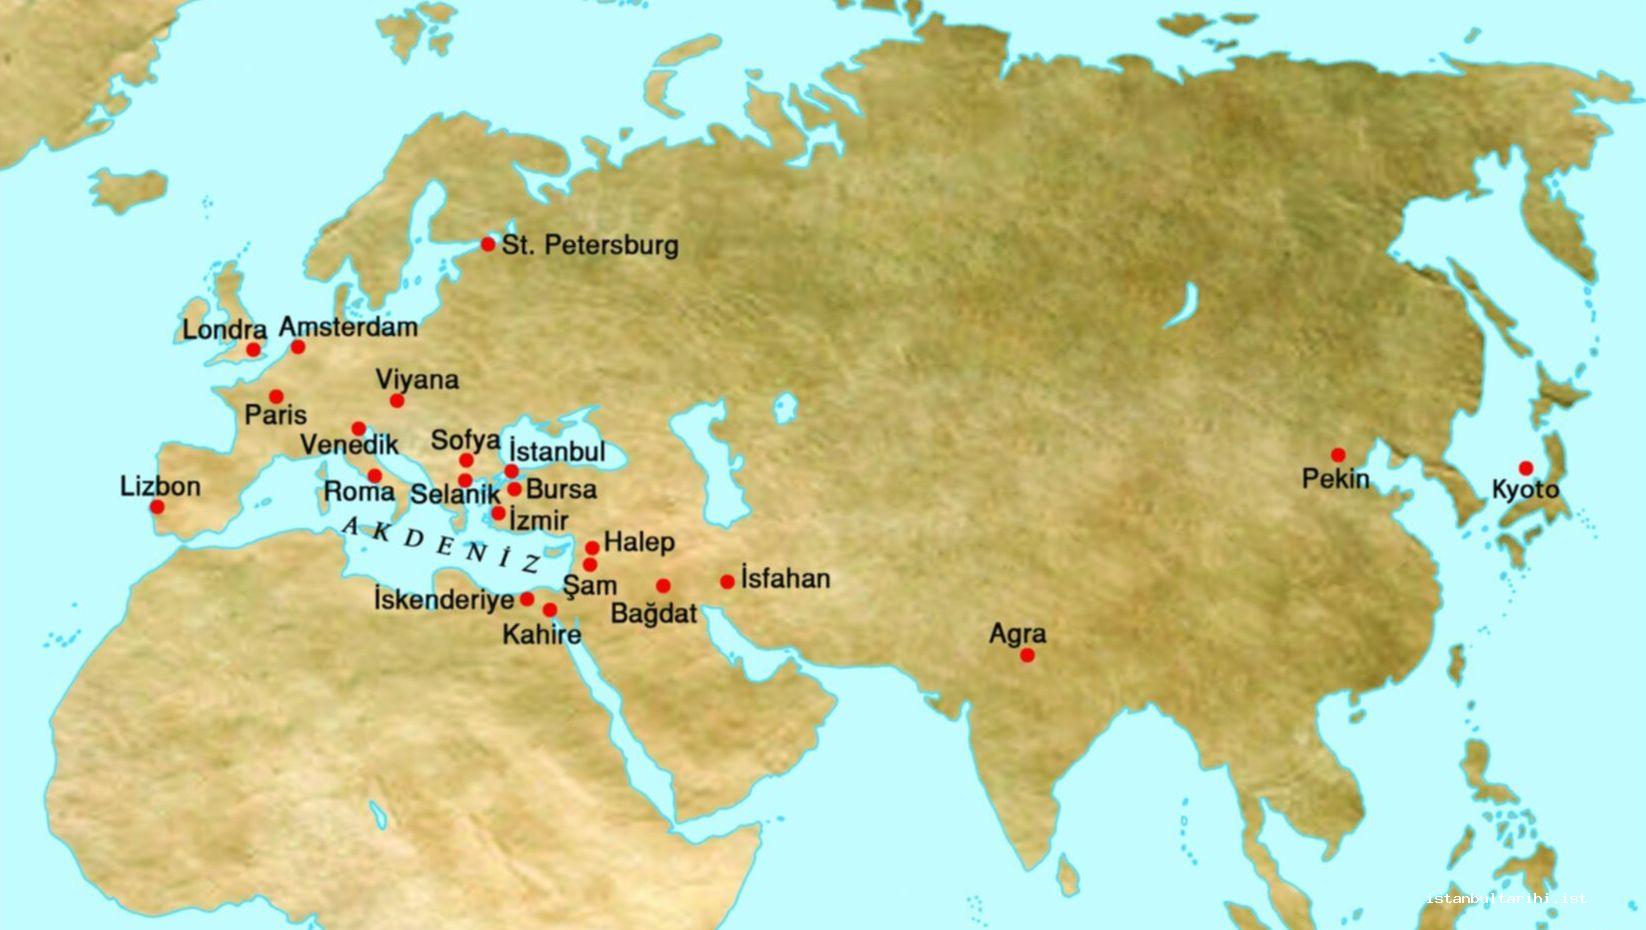 9- Ottoman Istanbul and the world cities in the 16th and 17th centuries (Map: Oğuz Kallek)